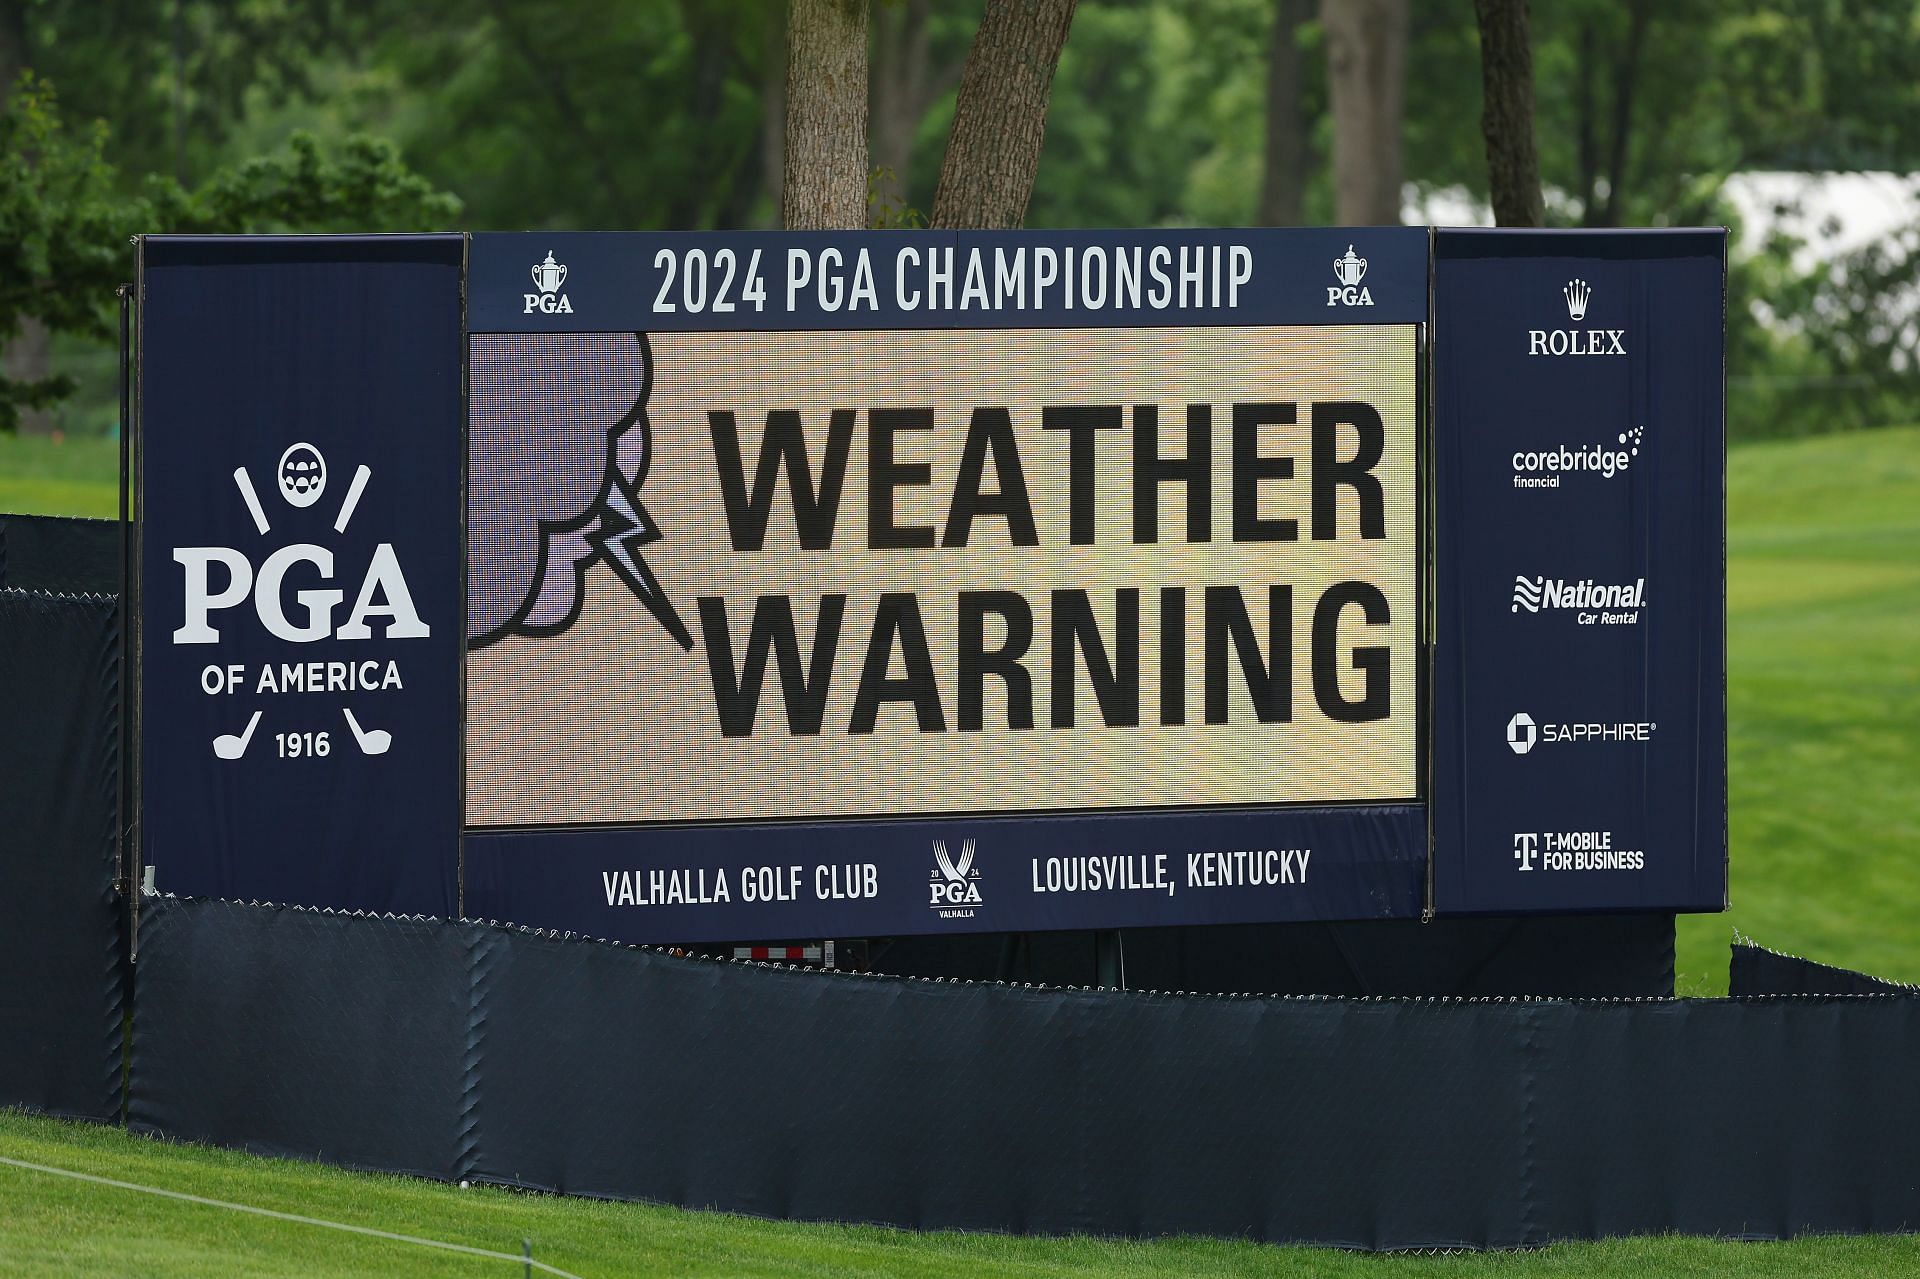 Weather has impacted the PGA Championship already